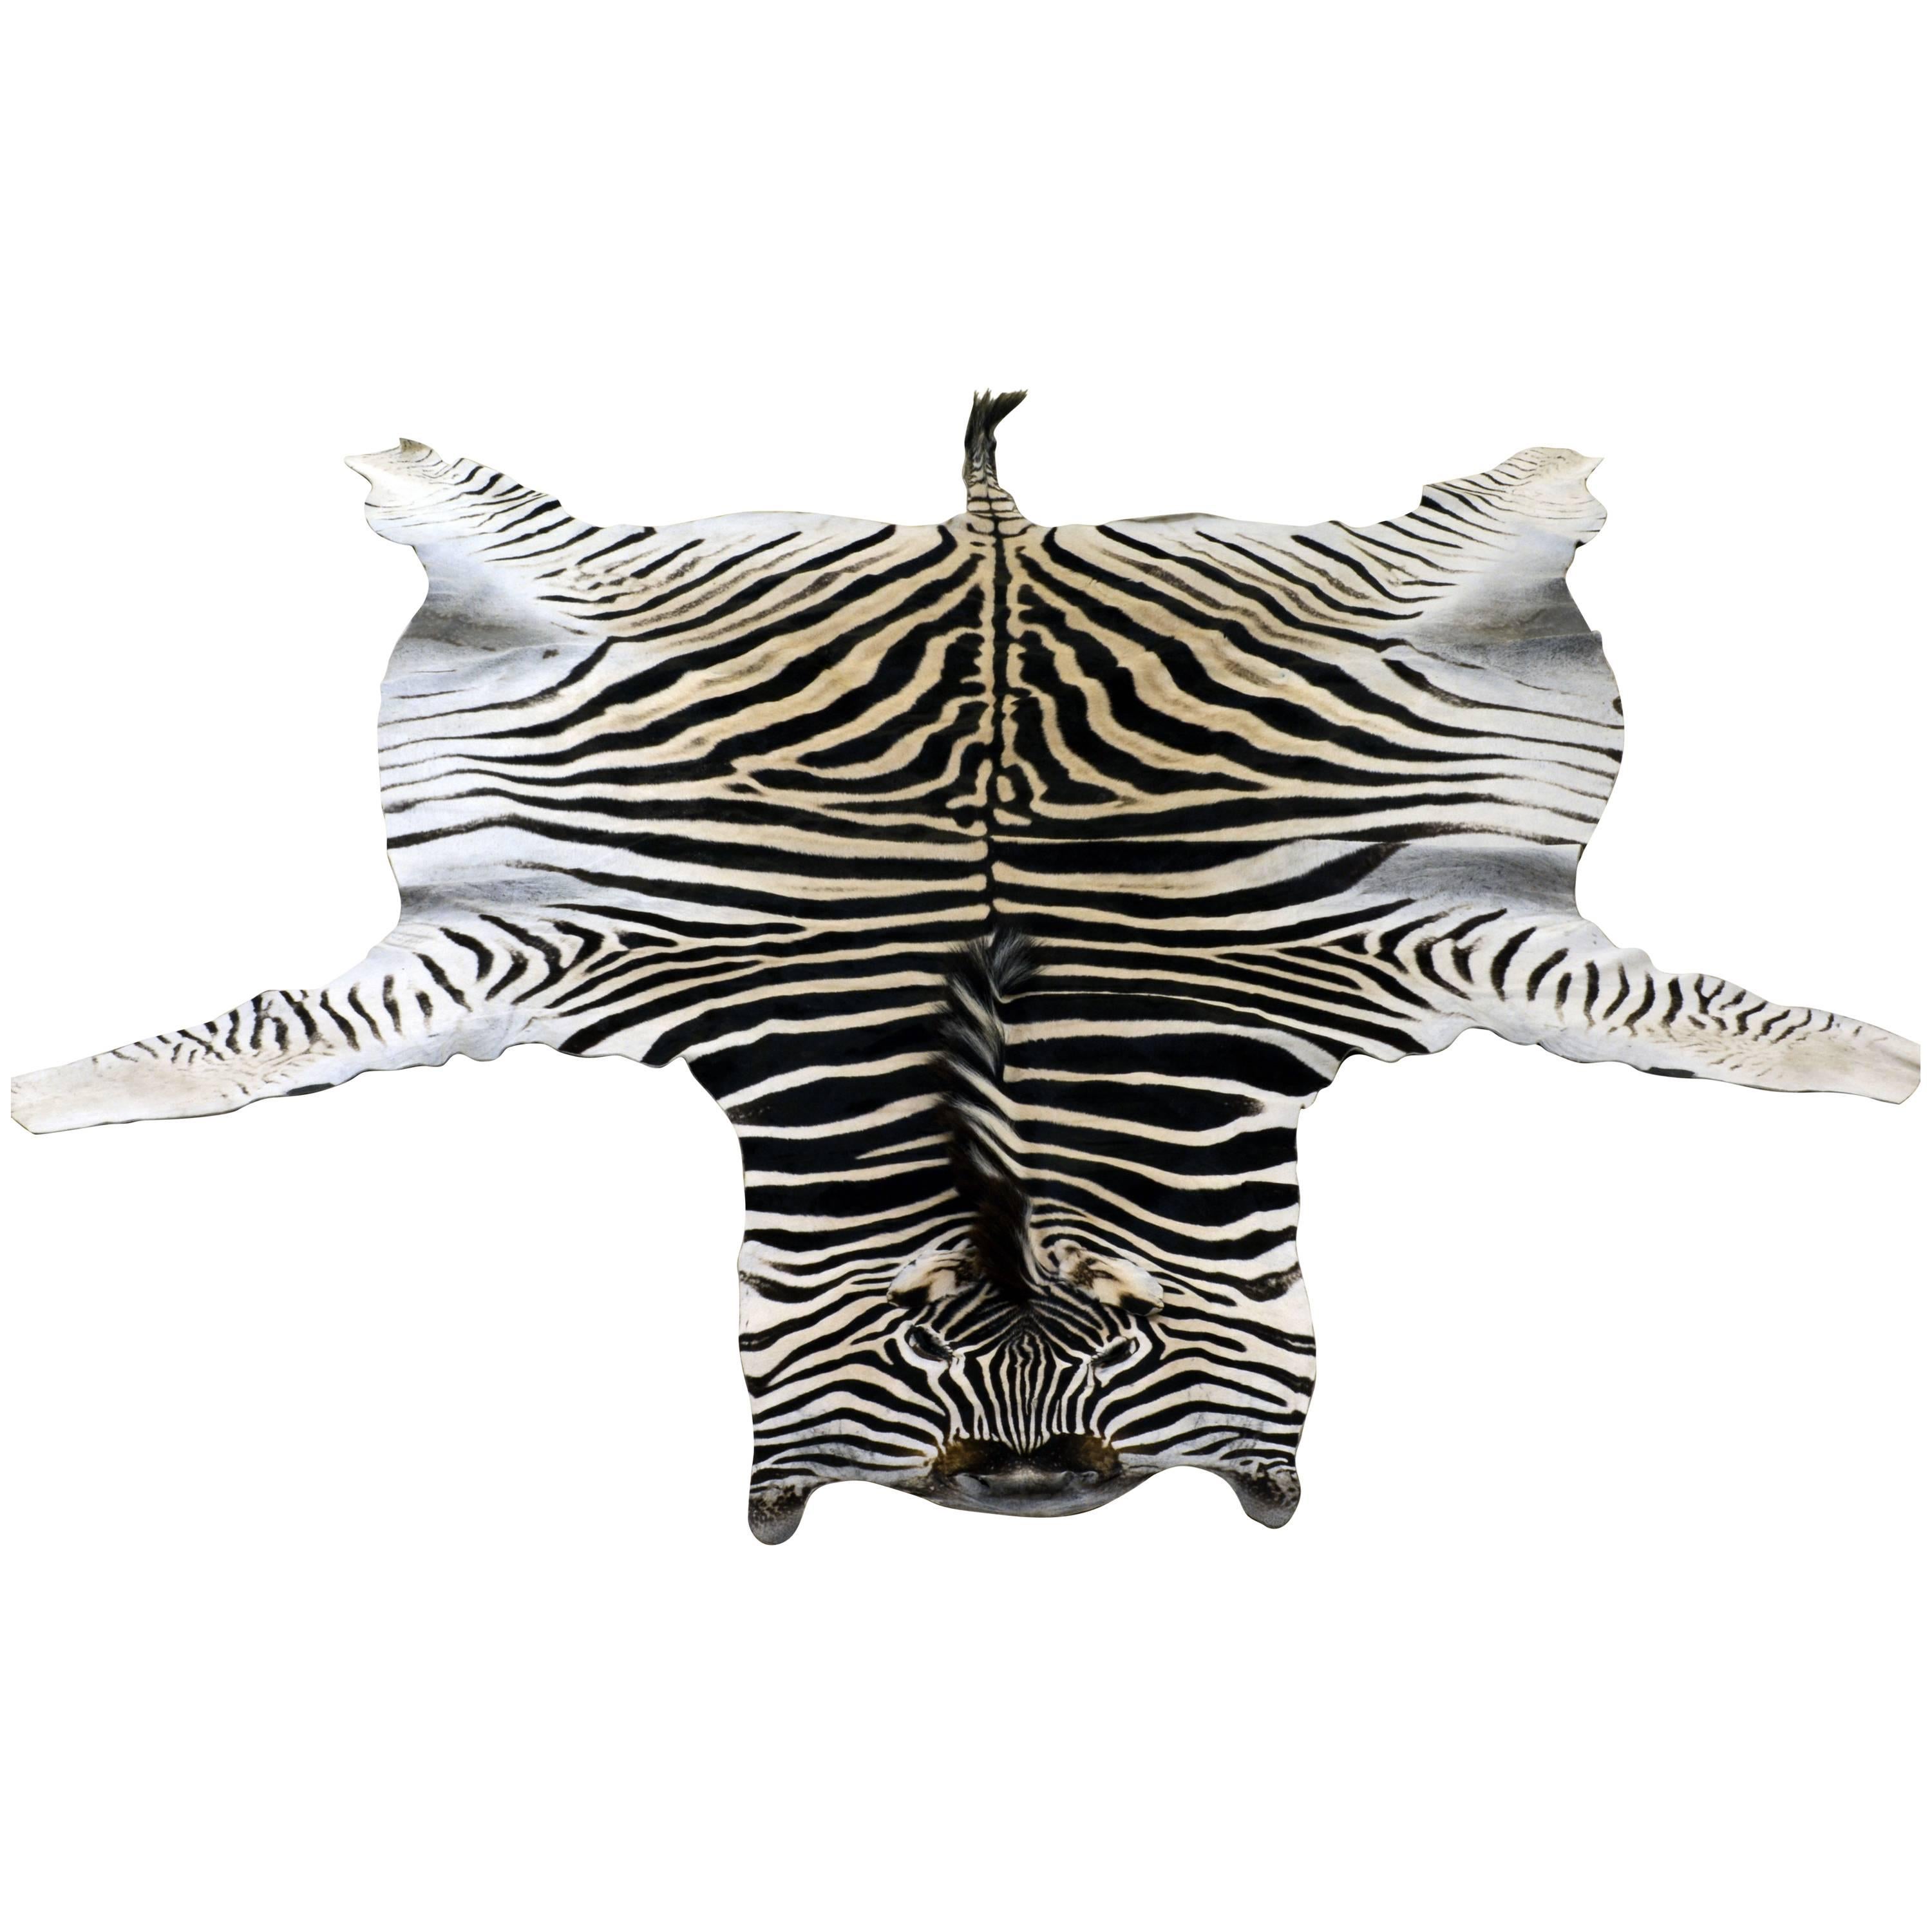 Large High Quality Burchell Zebra Hide Rug Well Marked and Great Color